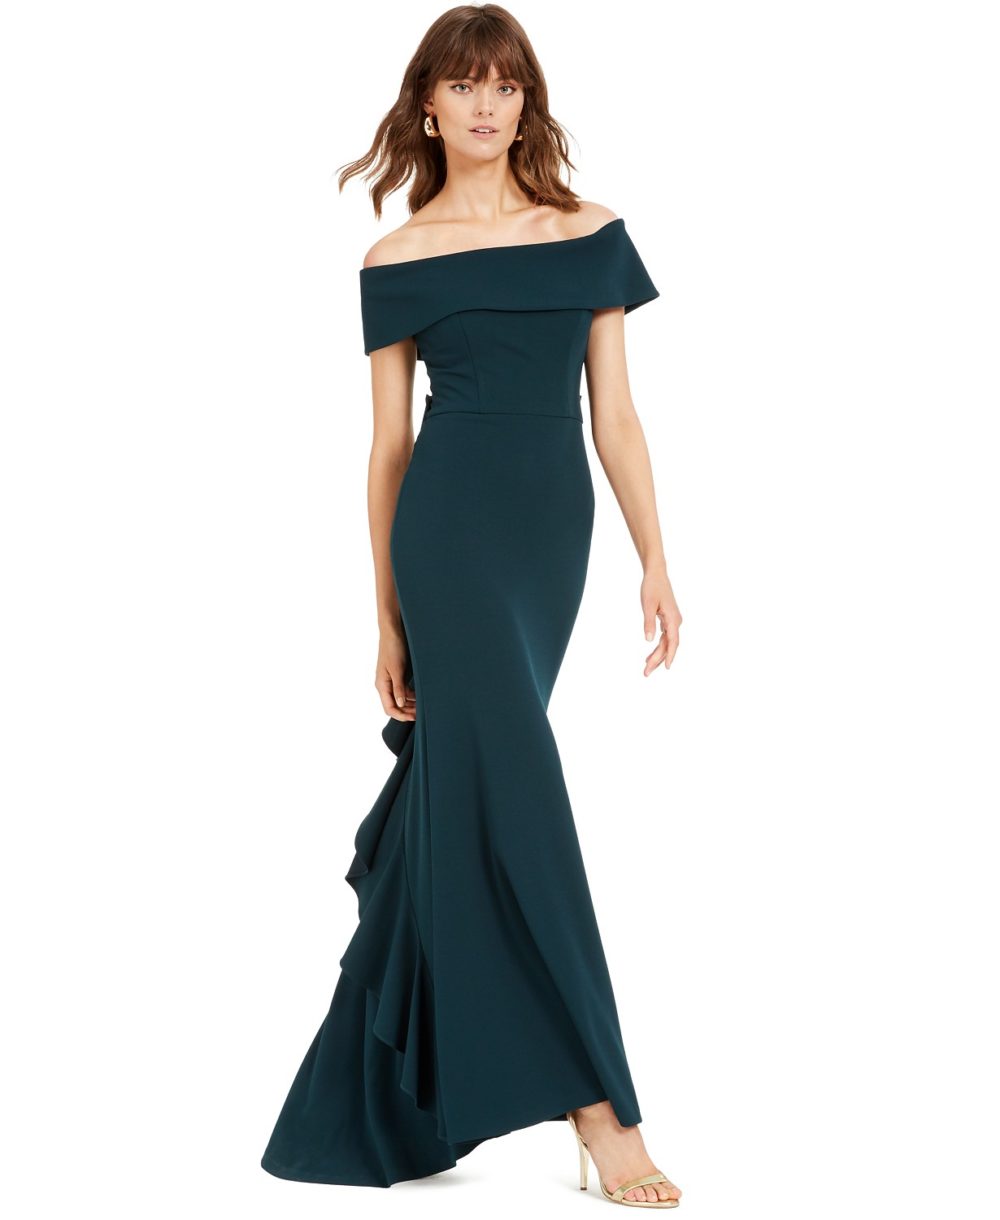 woocommerce-673321-2209615.cloudwaysapps.com-betsy-amp-adam-womens-green-off-the-shoulder-bow-back-gown-dress